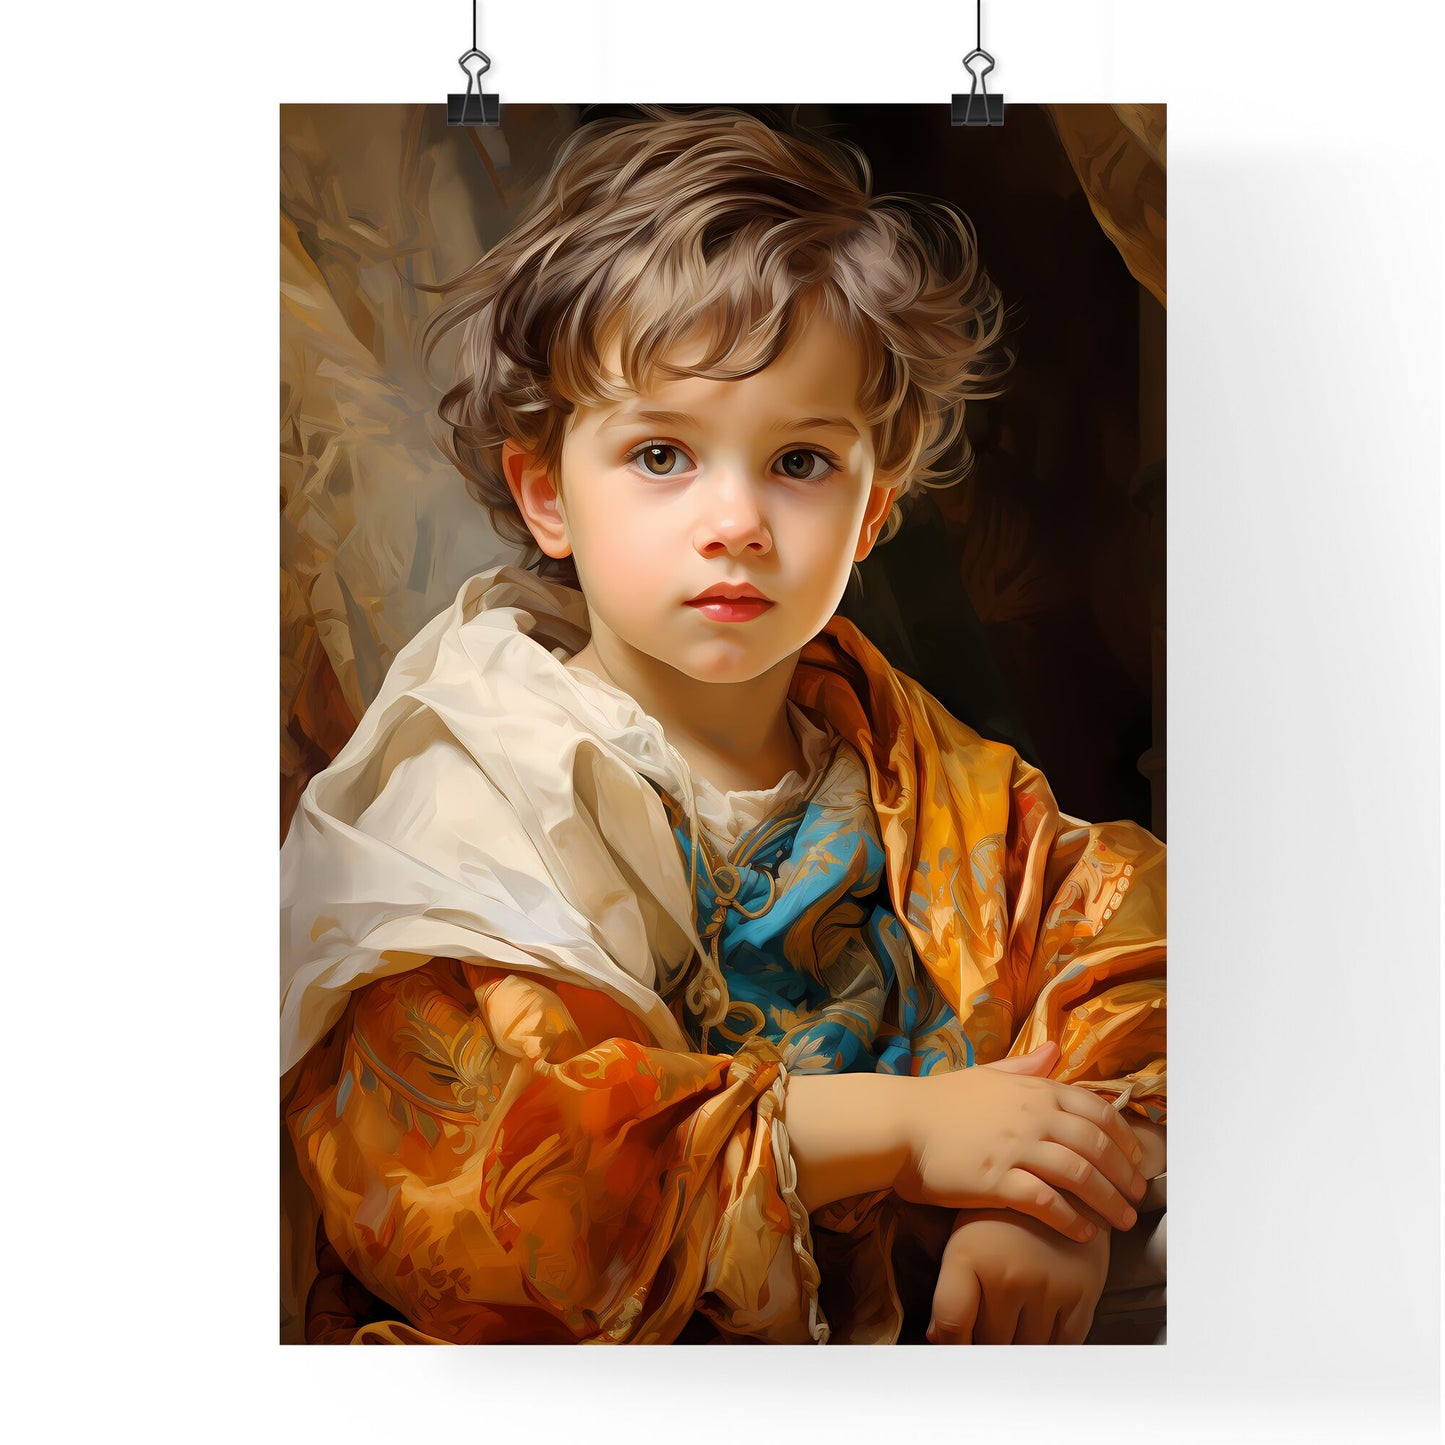 Baby Boy Posing For His First Portrait - A Child With A White Robe Default Title